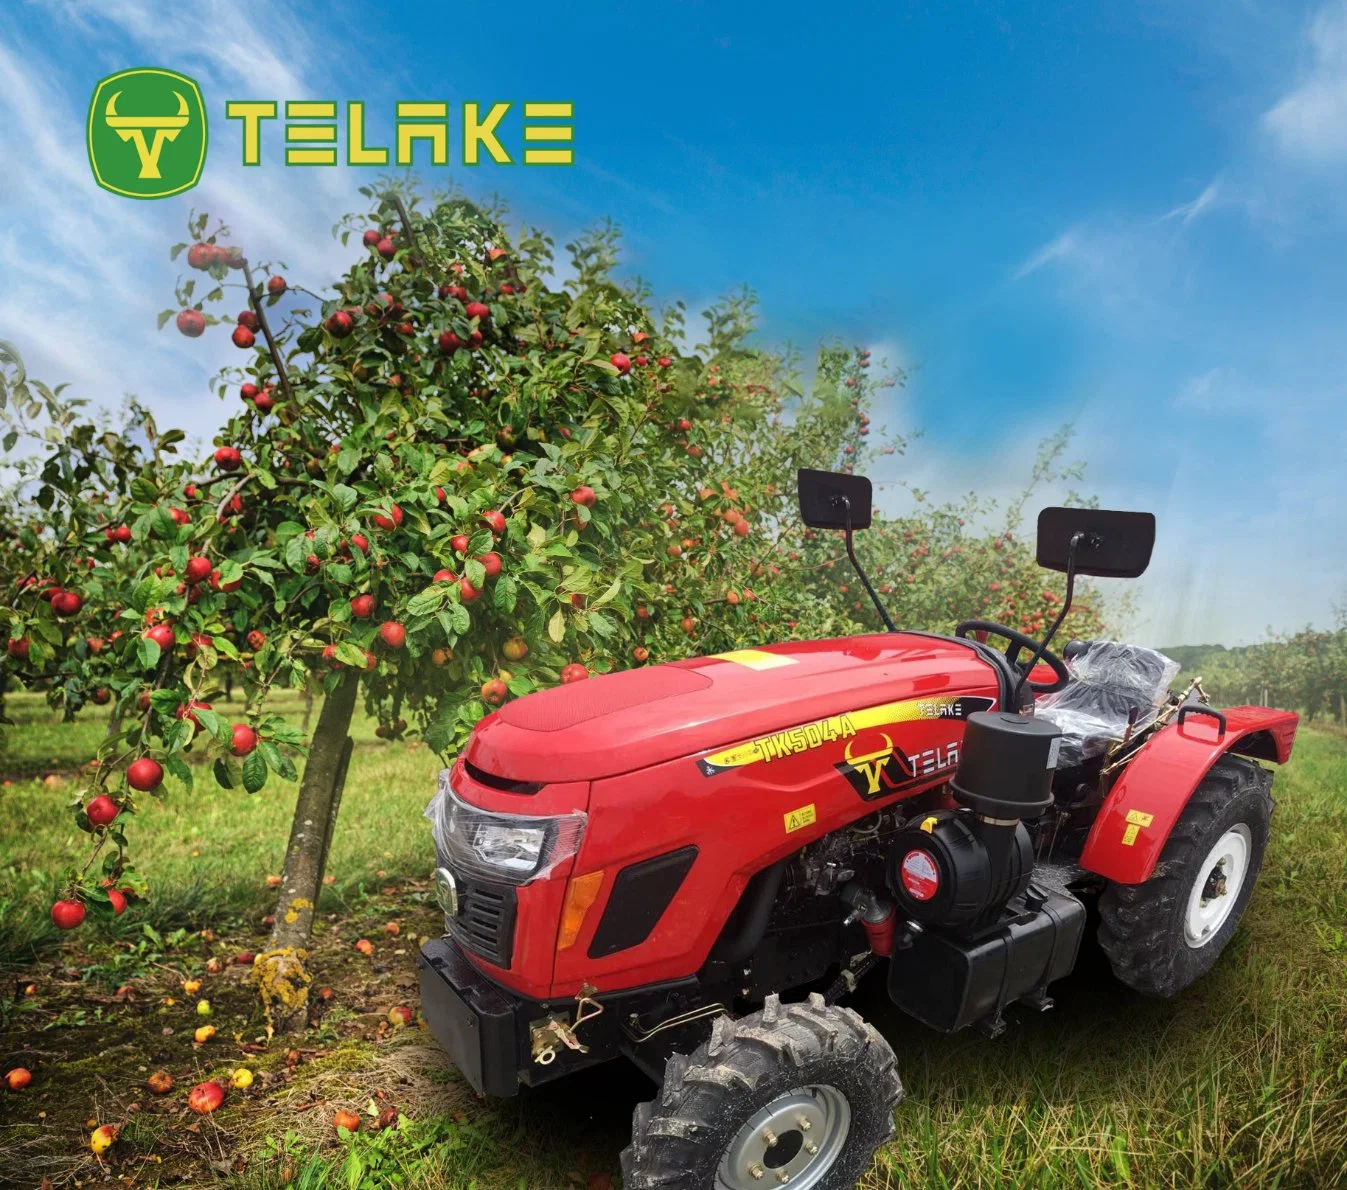 Telake Economic Durable Agricultural Equipment 30HP 40HP 50HP 55HP Tractor Garden Tool for Farming